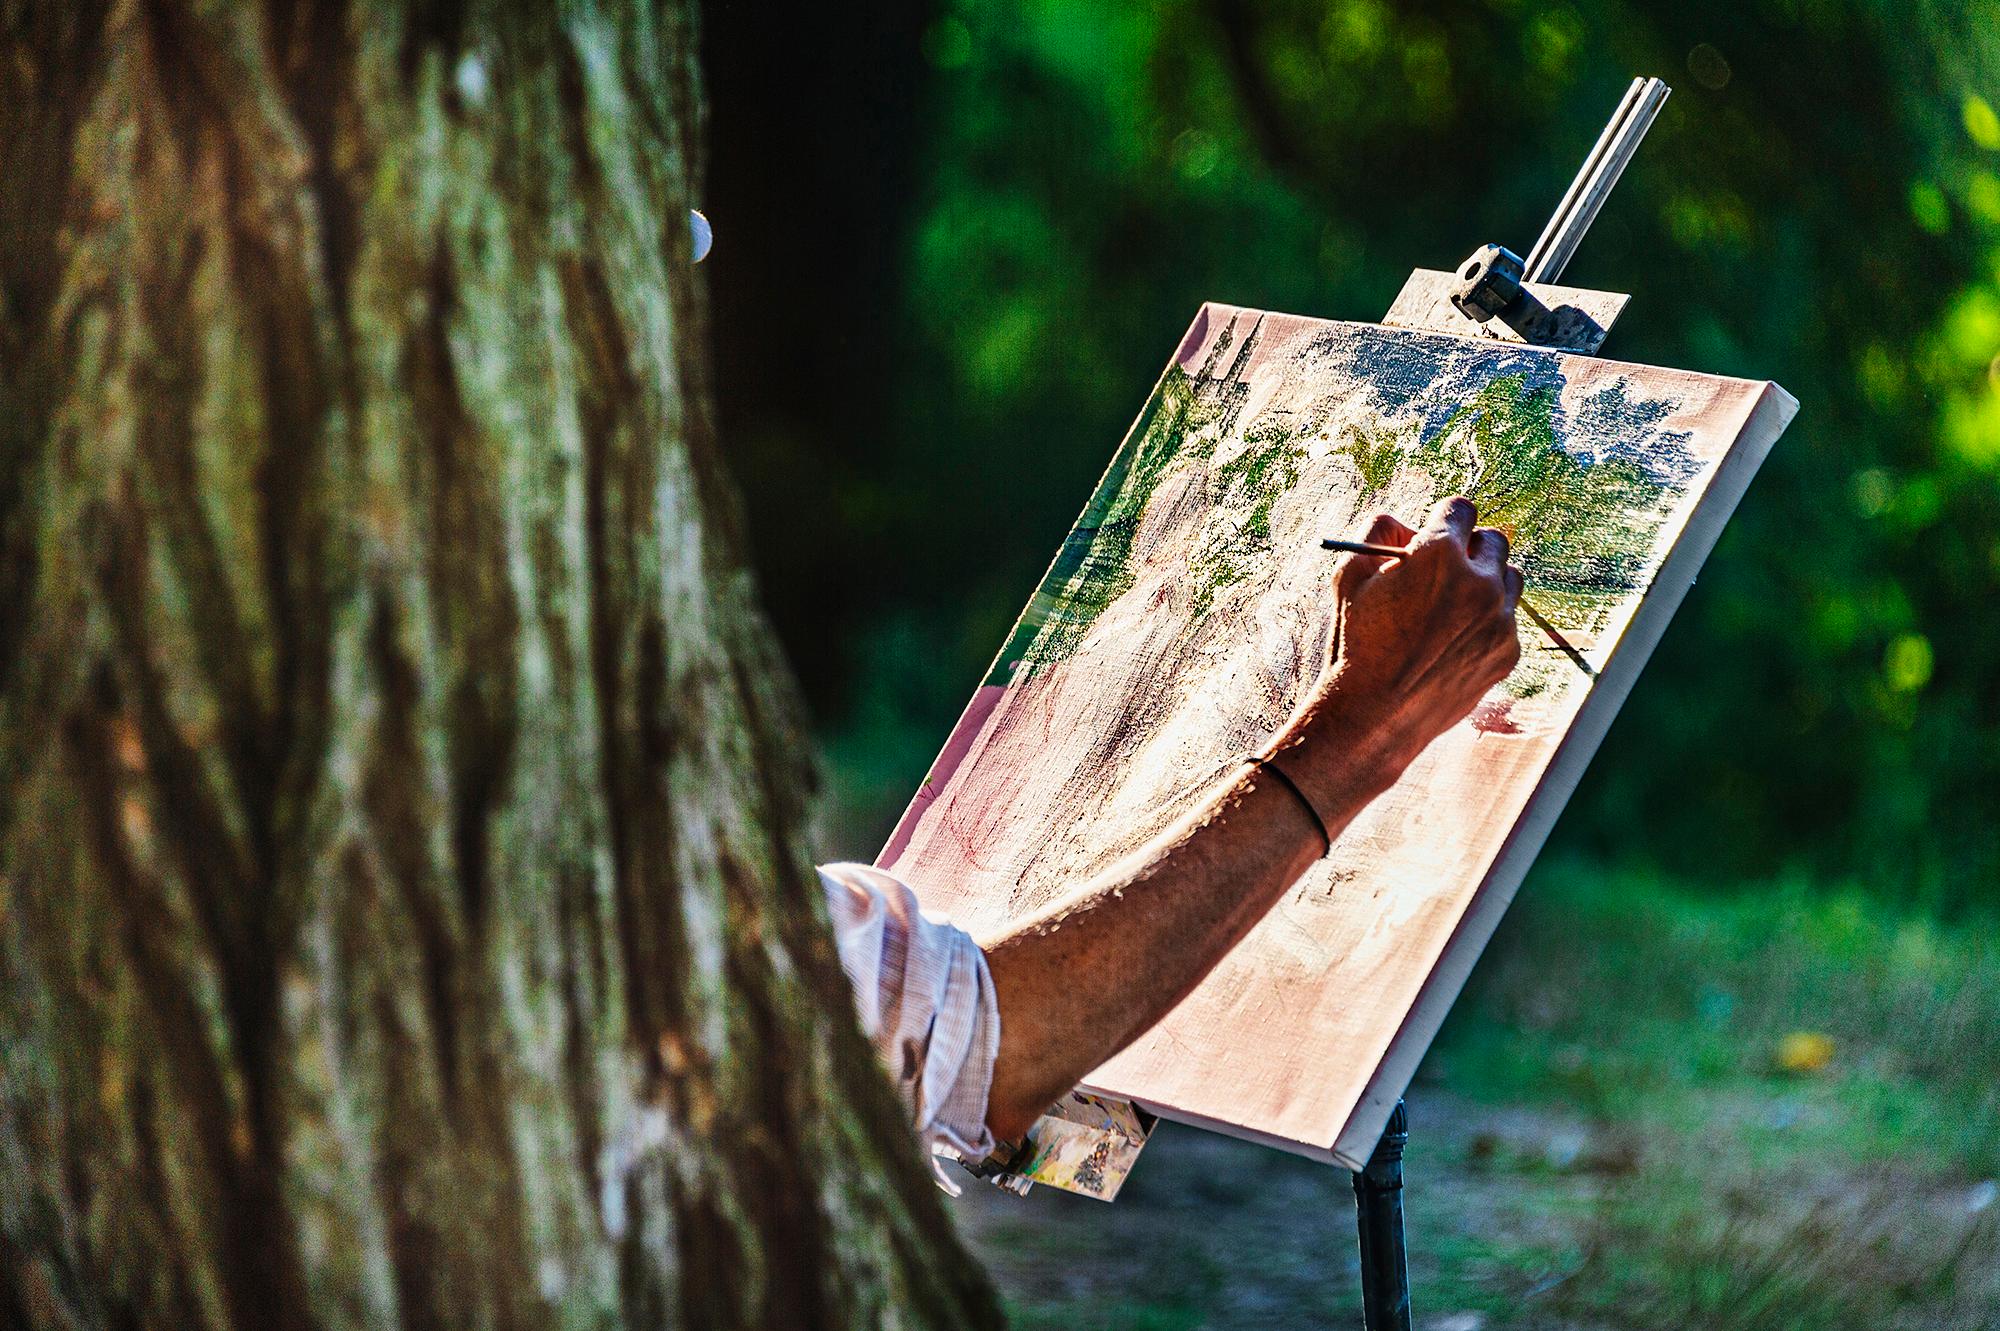 Picture of the Unknown - Plein Air Painter's Surreal Dream